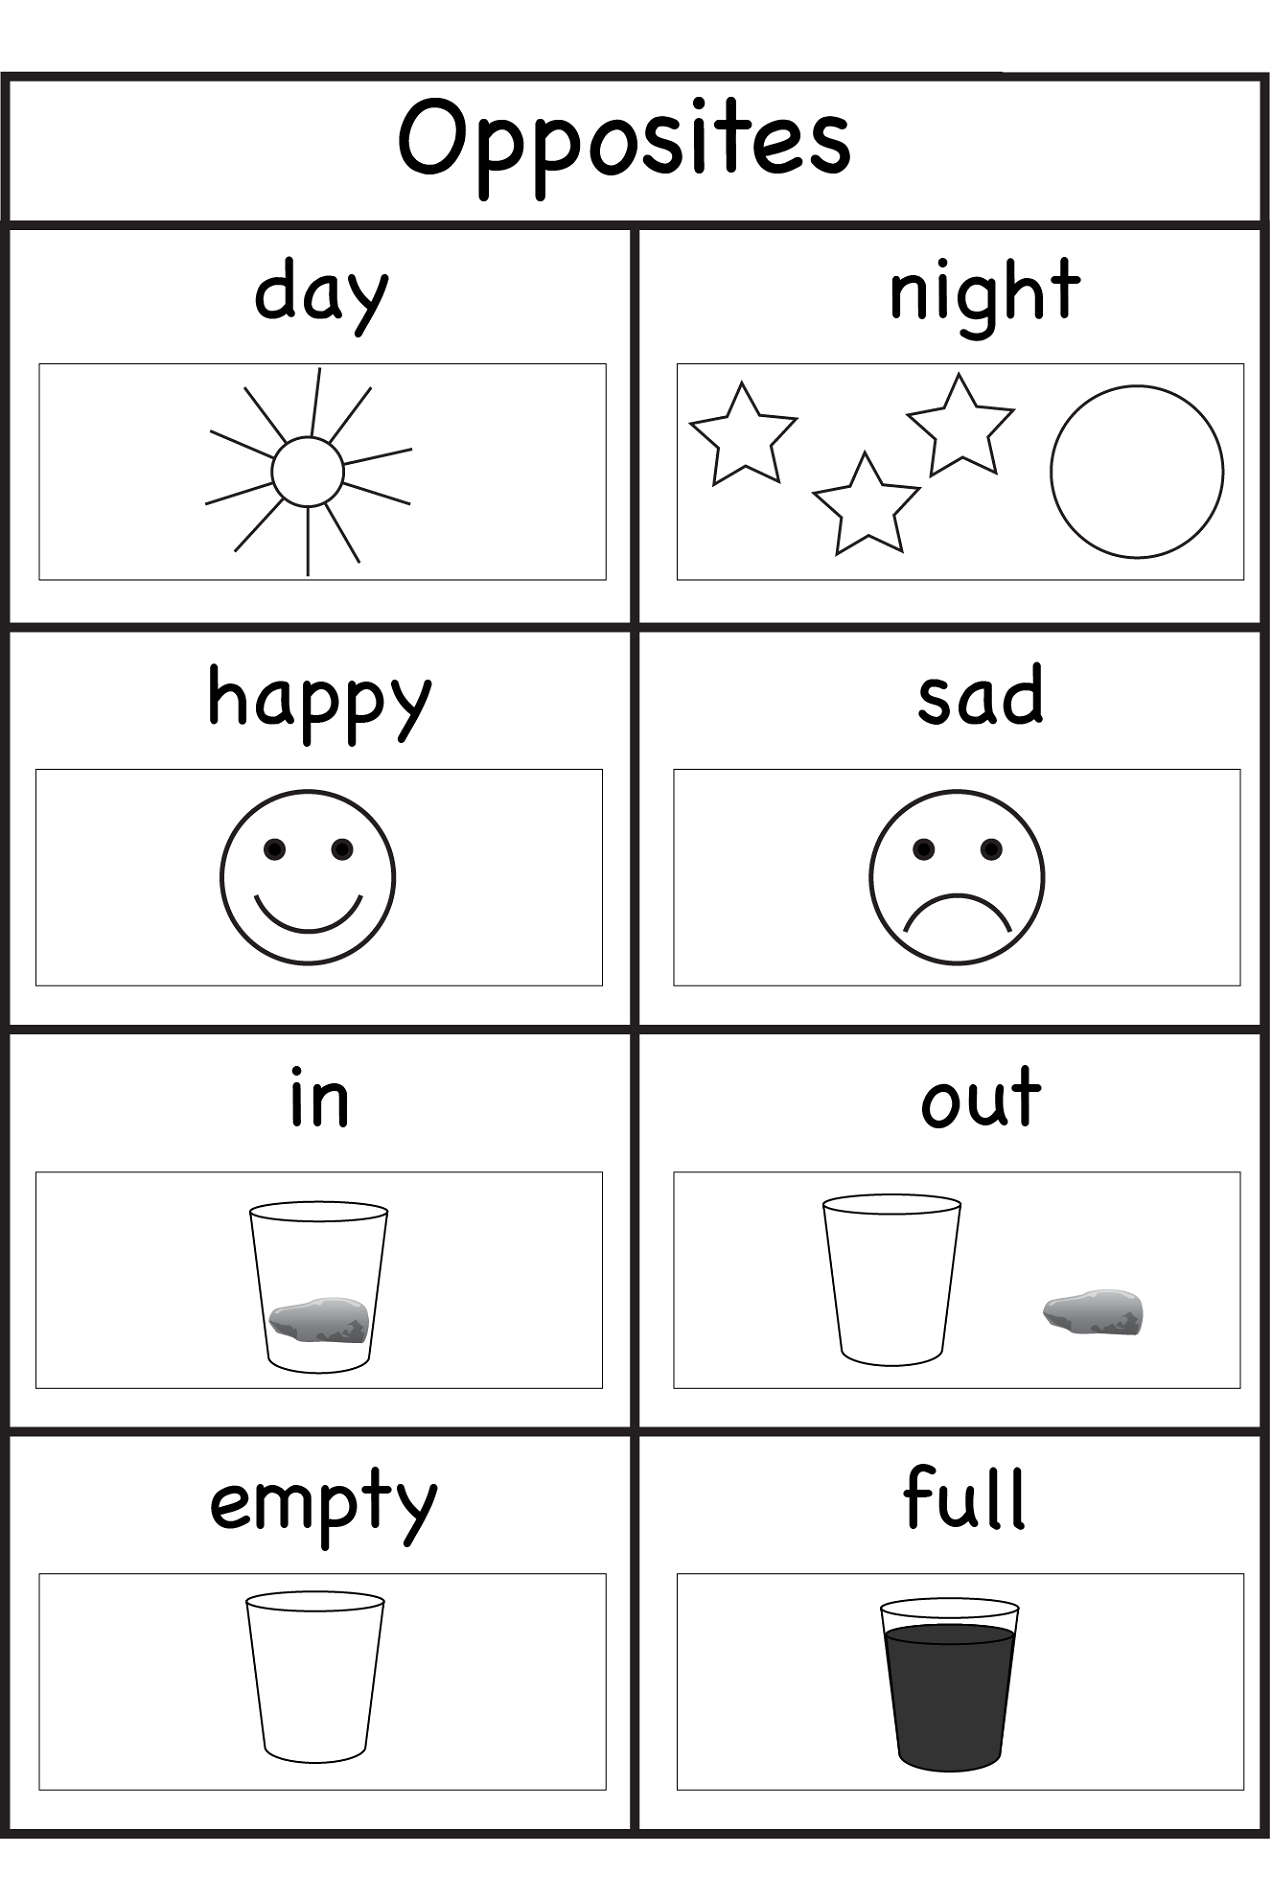 Activity Sheets For 3 Year Olds – With Free Preschool Worksheets Age | Free Printable Worksheets For 3 Year Olds